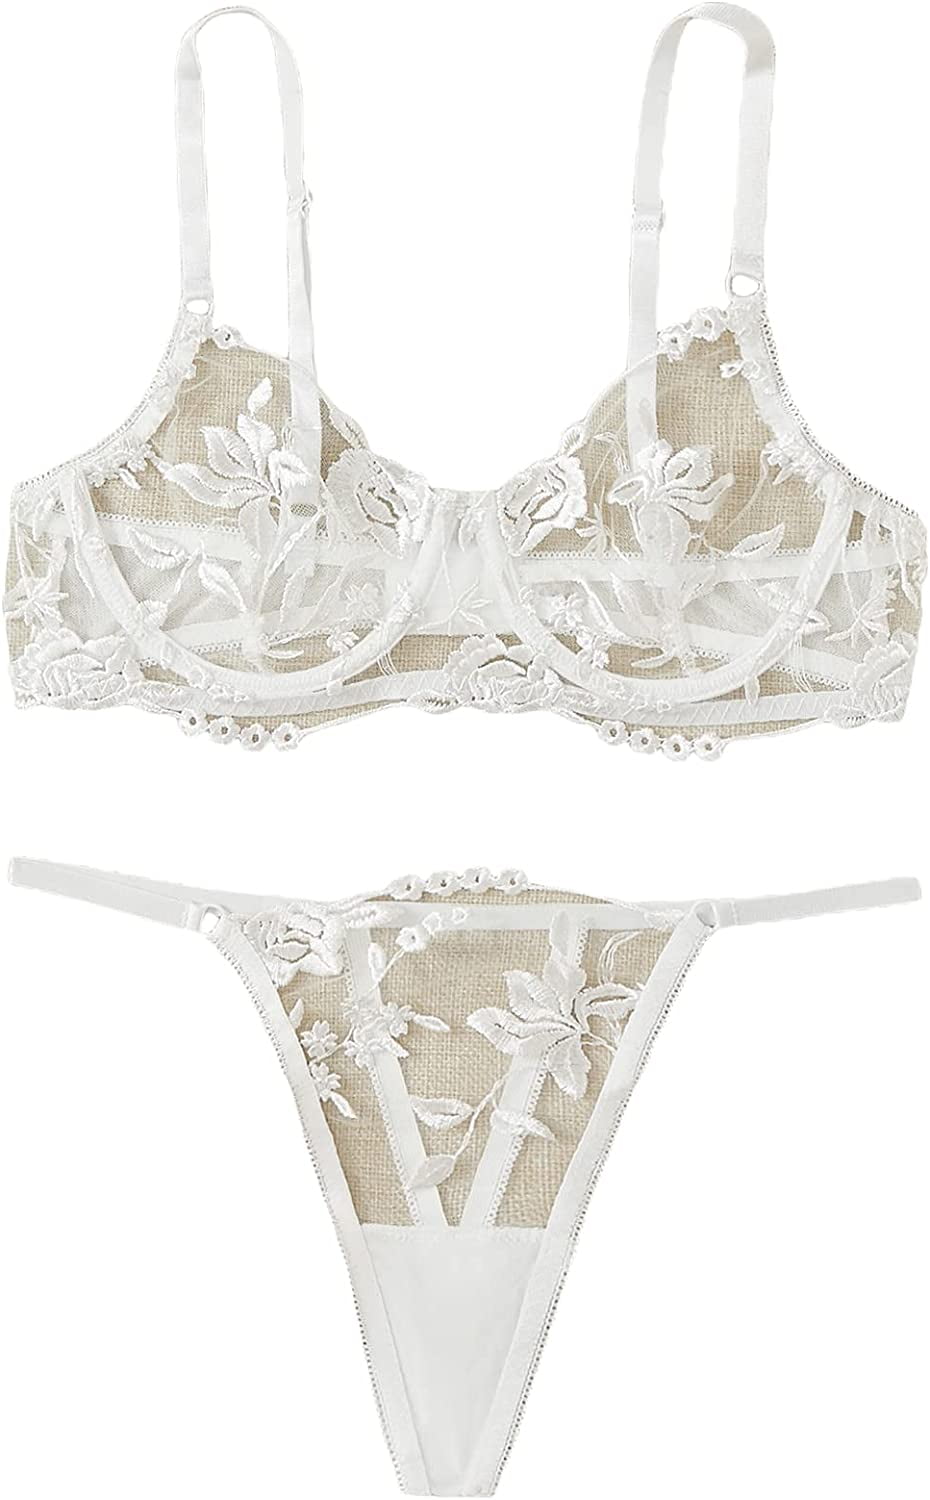 SOLY HUX Women's Floral Embroidered Mesh Sheer Underwire Lingerie Set ...